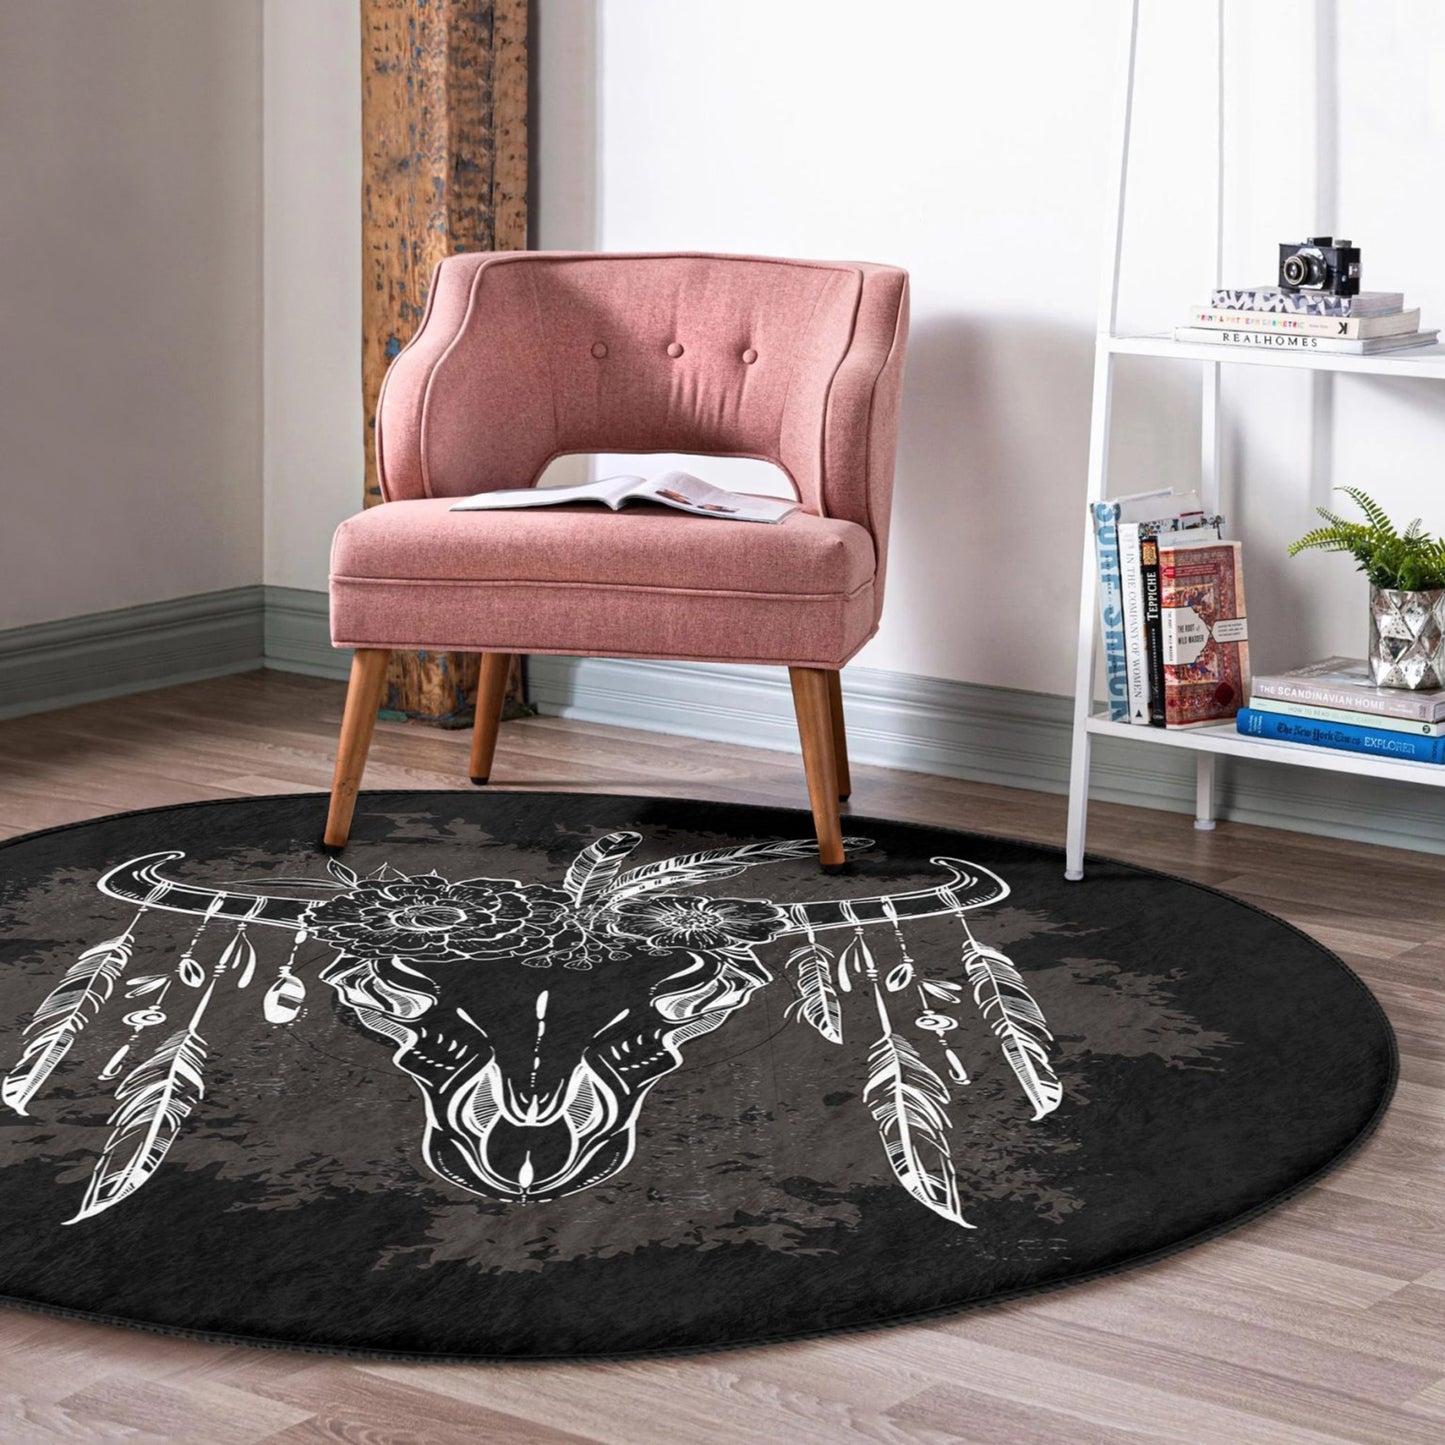 Round Patterned Floor Rug - Versatile Home Accent